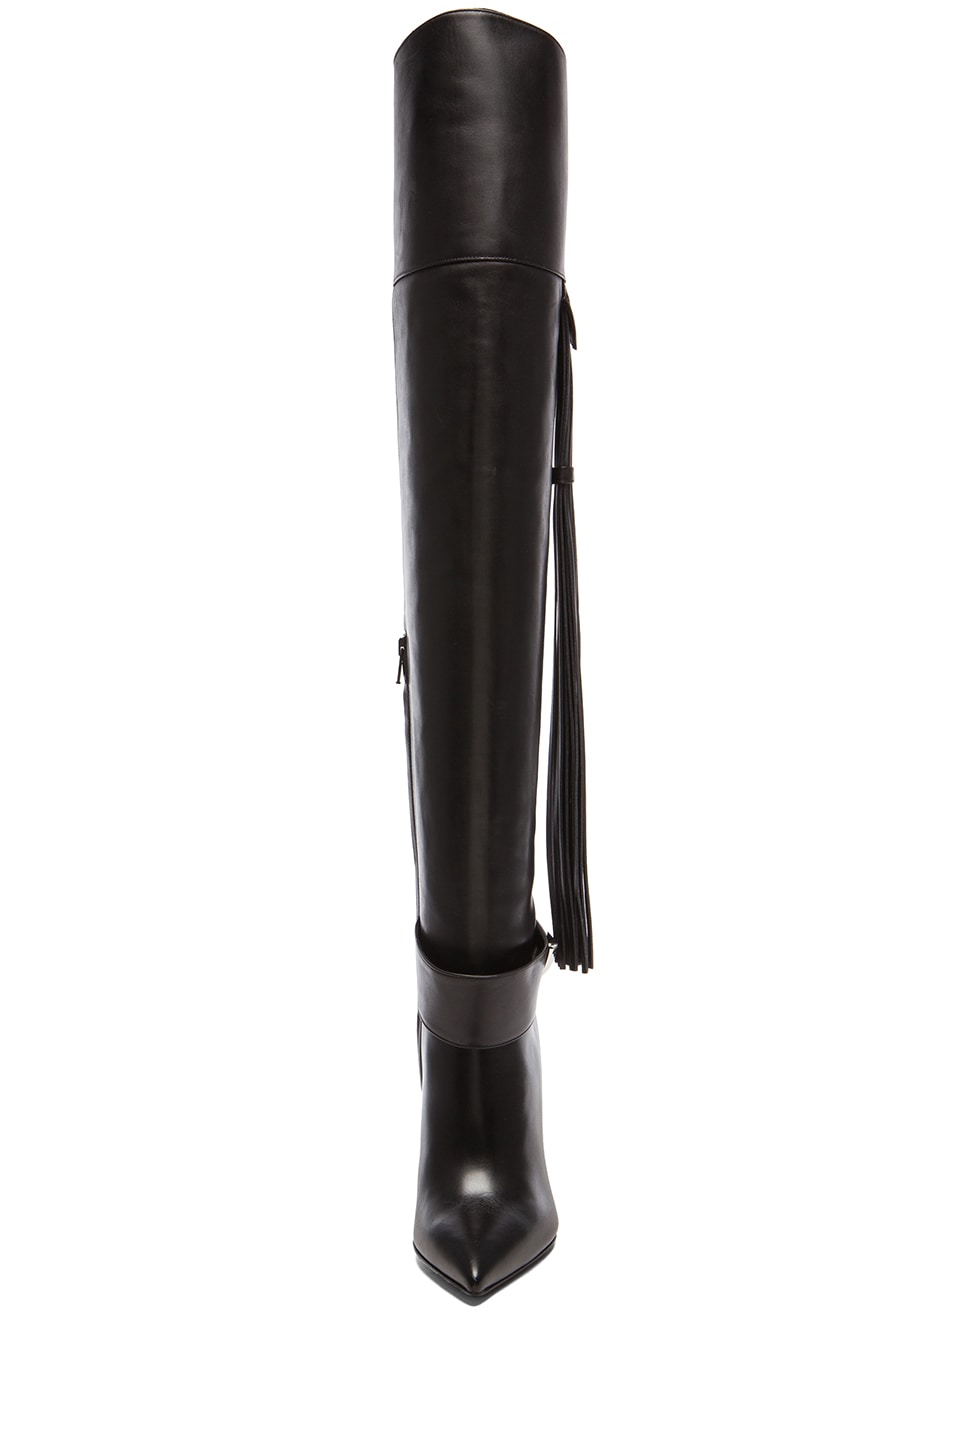 VERSACE Fringe Thigh High Leather Boots in Black & Silver | FWRD